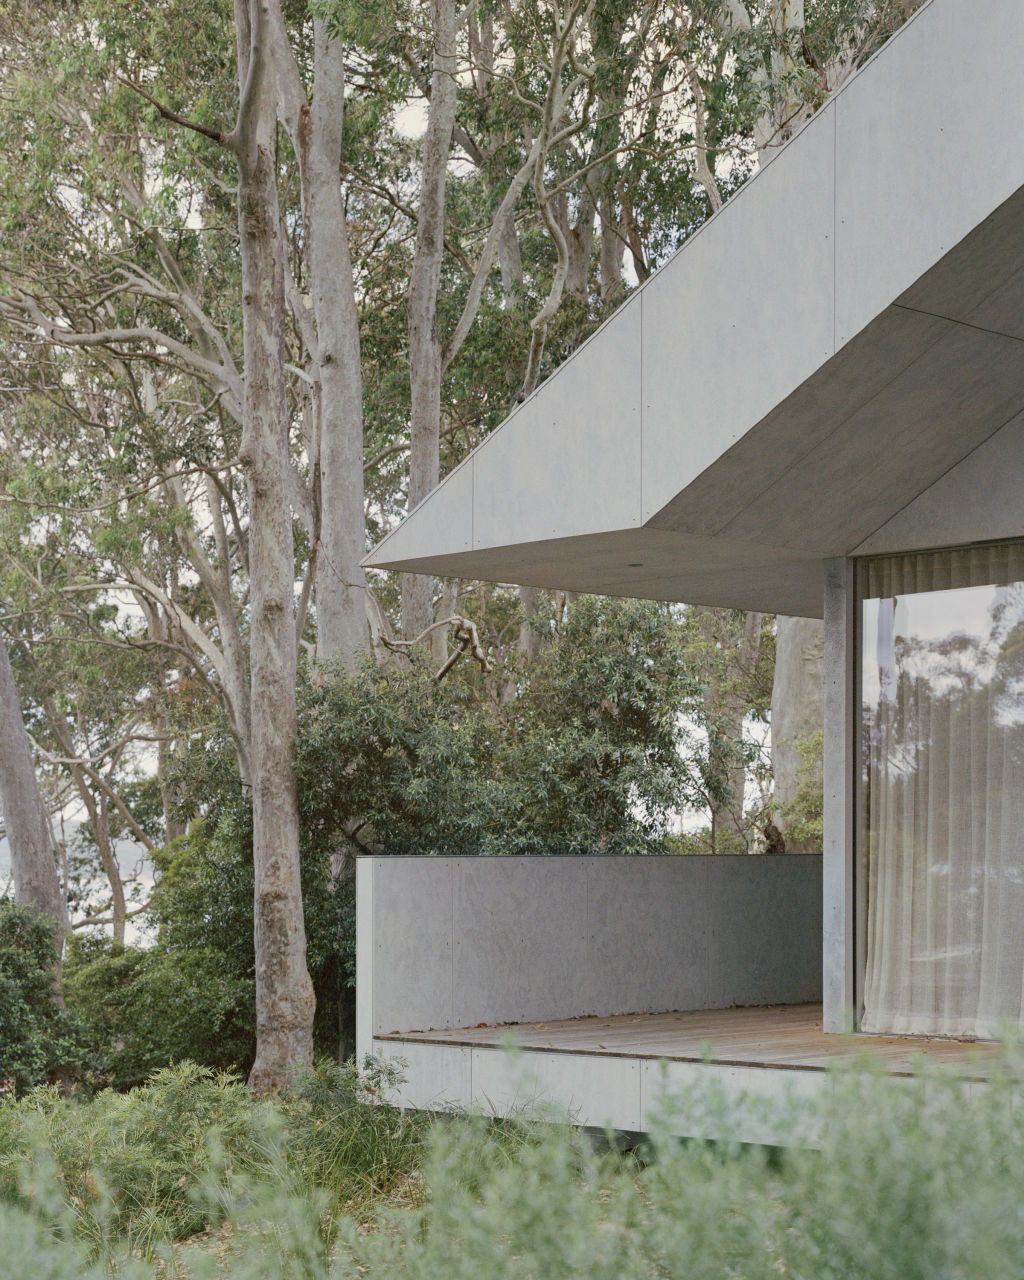 A covered deck wraps around to a street-facing porch. Photo: Rory Gardiner